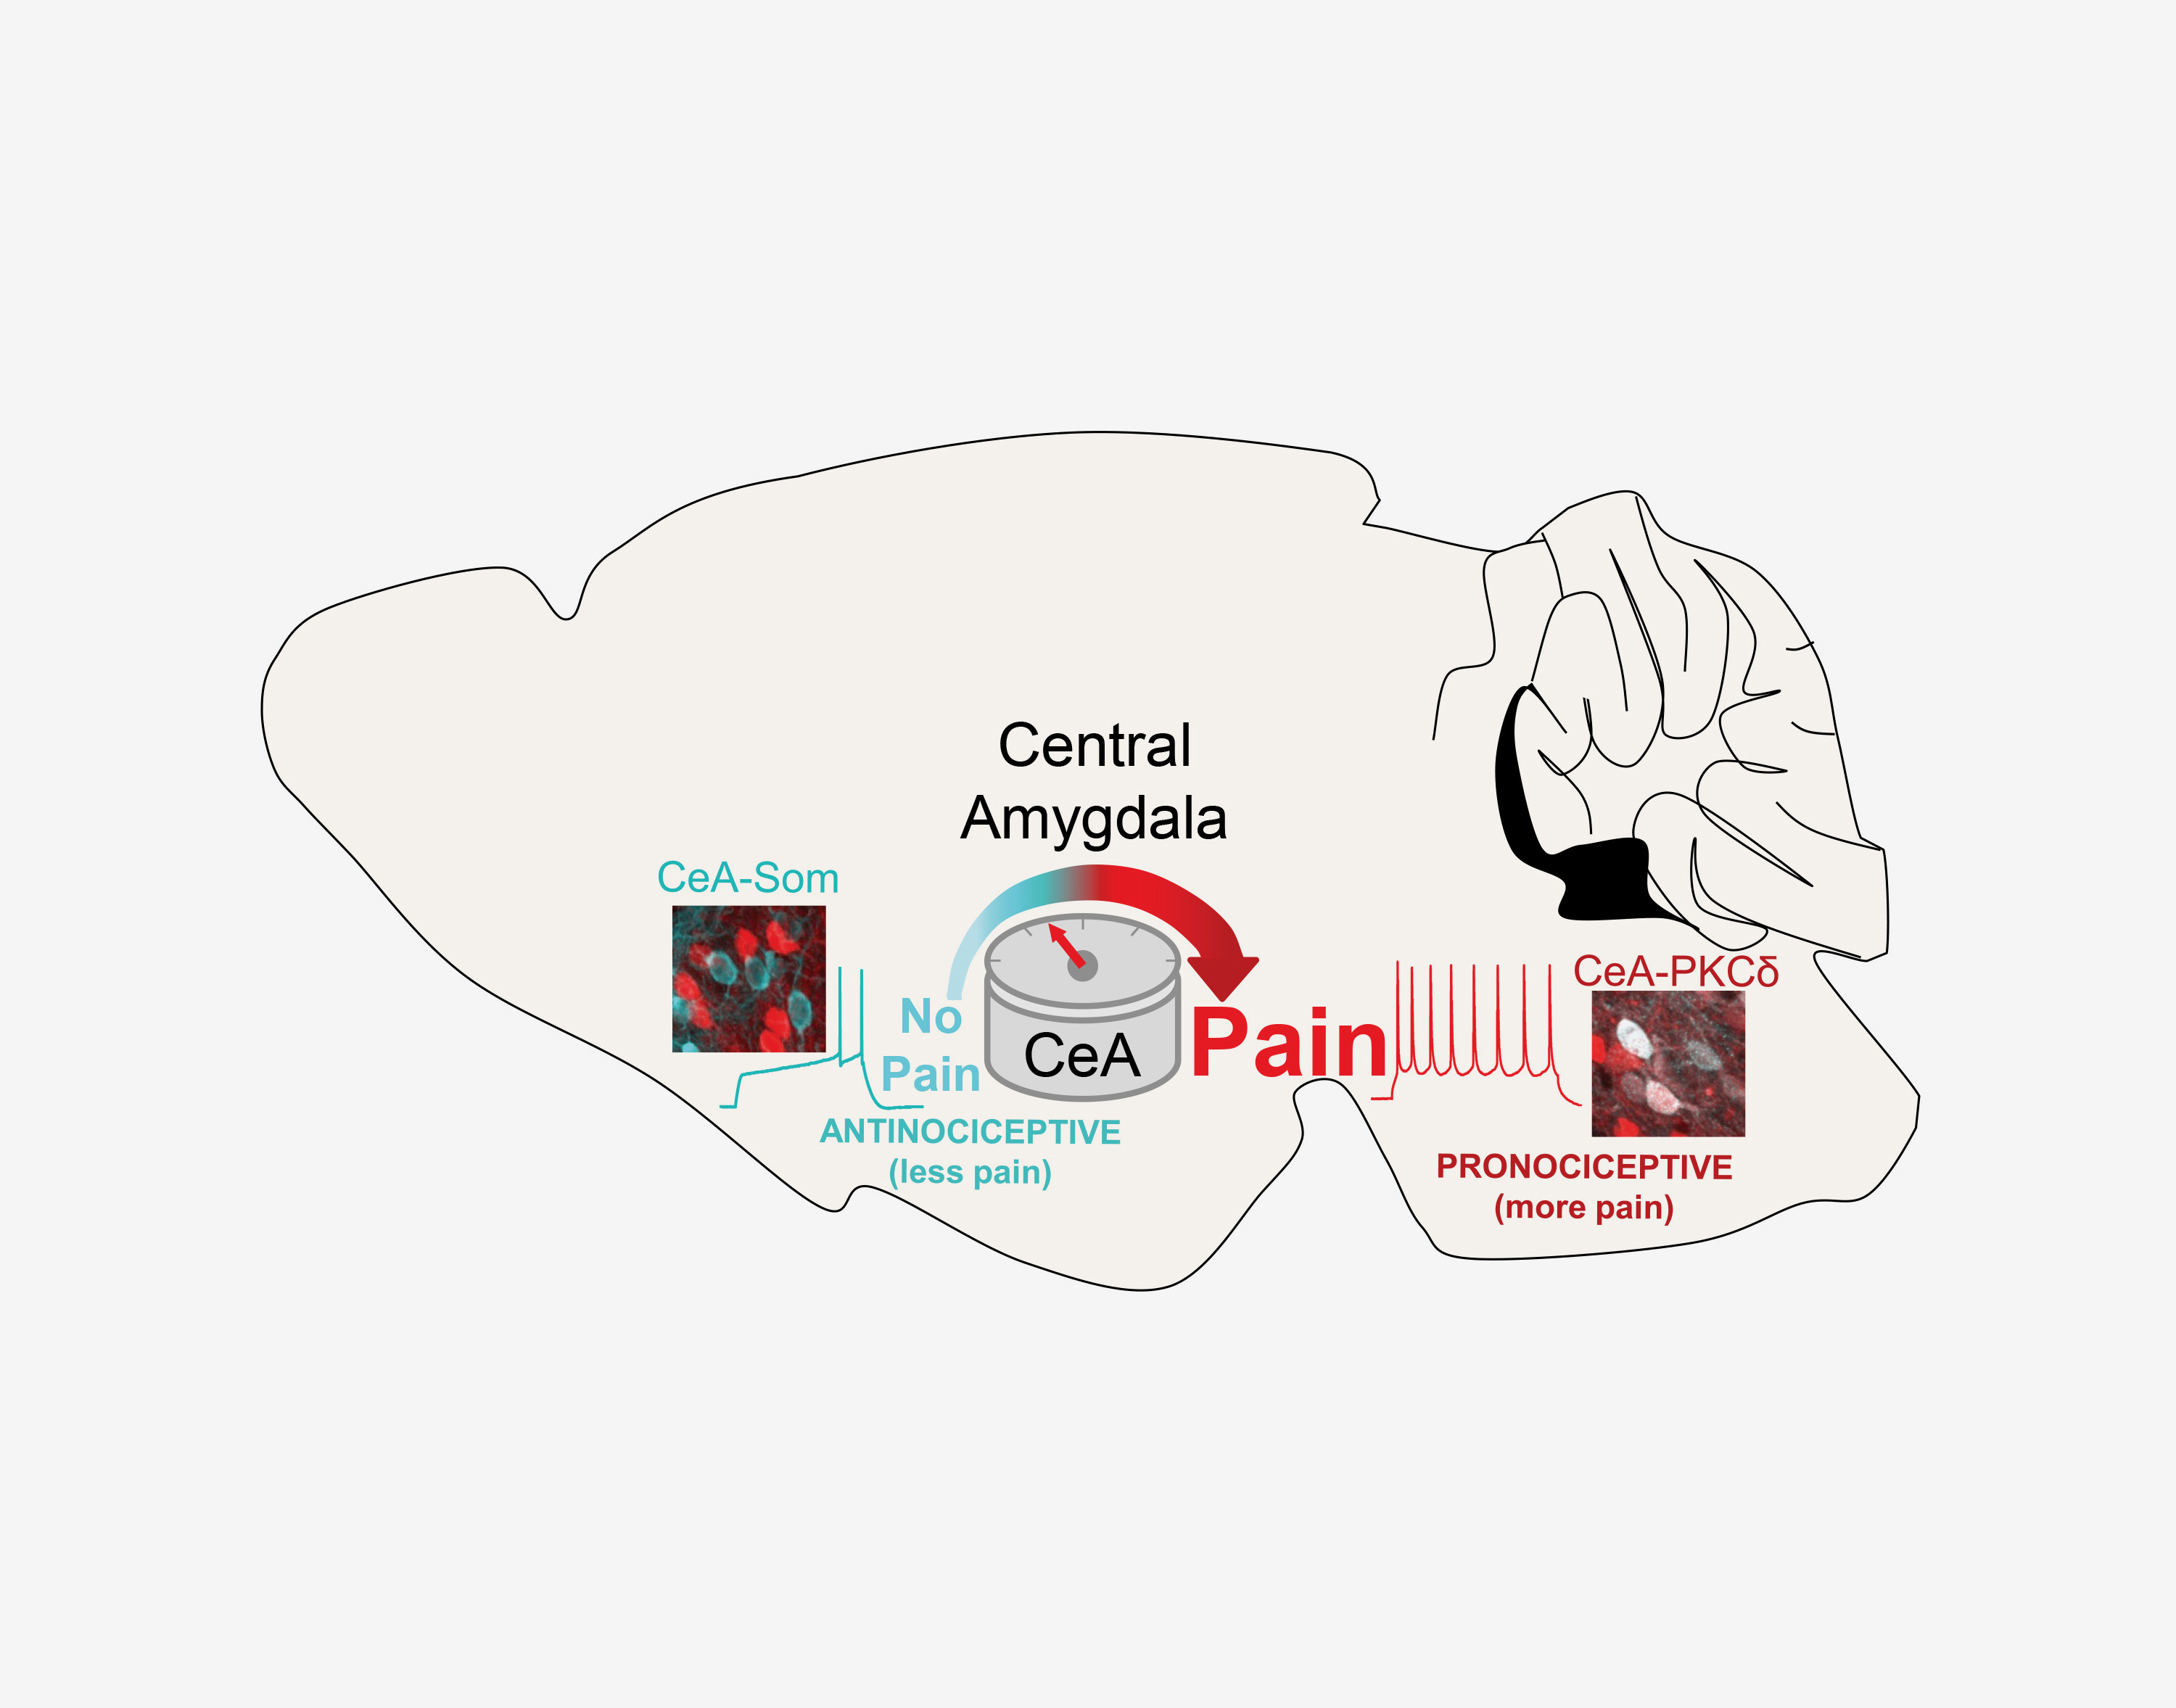 The central amygdala (CeA) functions as a pain rheostat in the forebrain, enhancing or attenuating pain. Modulation of pain is accomplished by cell-type-specific changes in activity after injury. Activity in CeA-PKCδ neurons drives increases in pain-relat